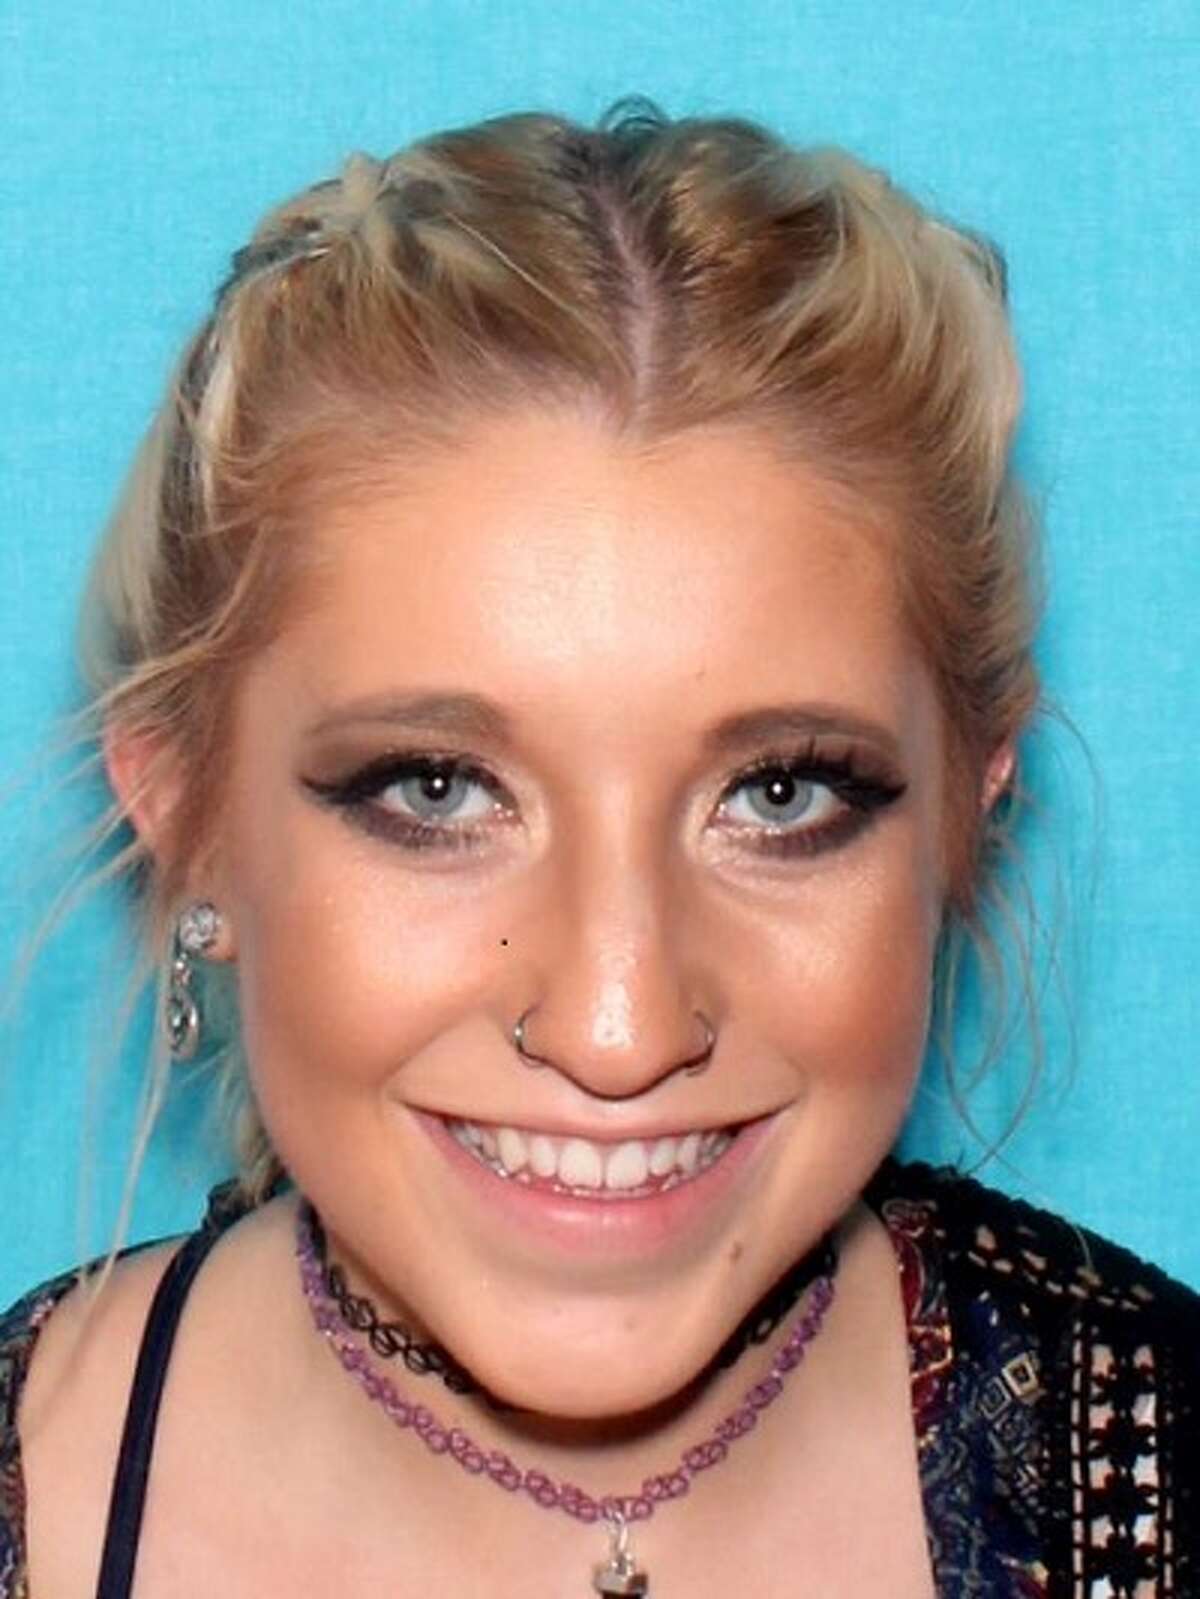 Caitlin Denison who was 19-year-old when she was reported missing reportedly called her family on January 10, 2018, and told them she "felt scared for her life," according to the Midland Crime Stoppers. That would be the last time Denison was seen or heard from. 